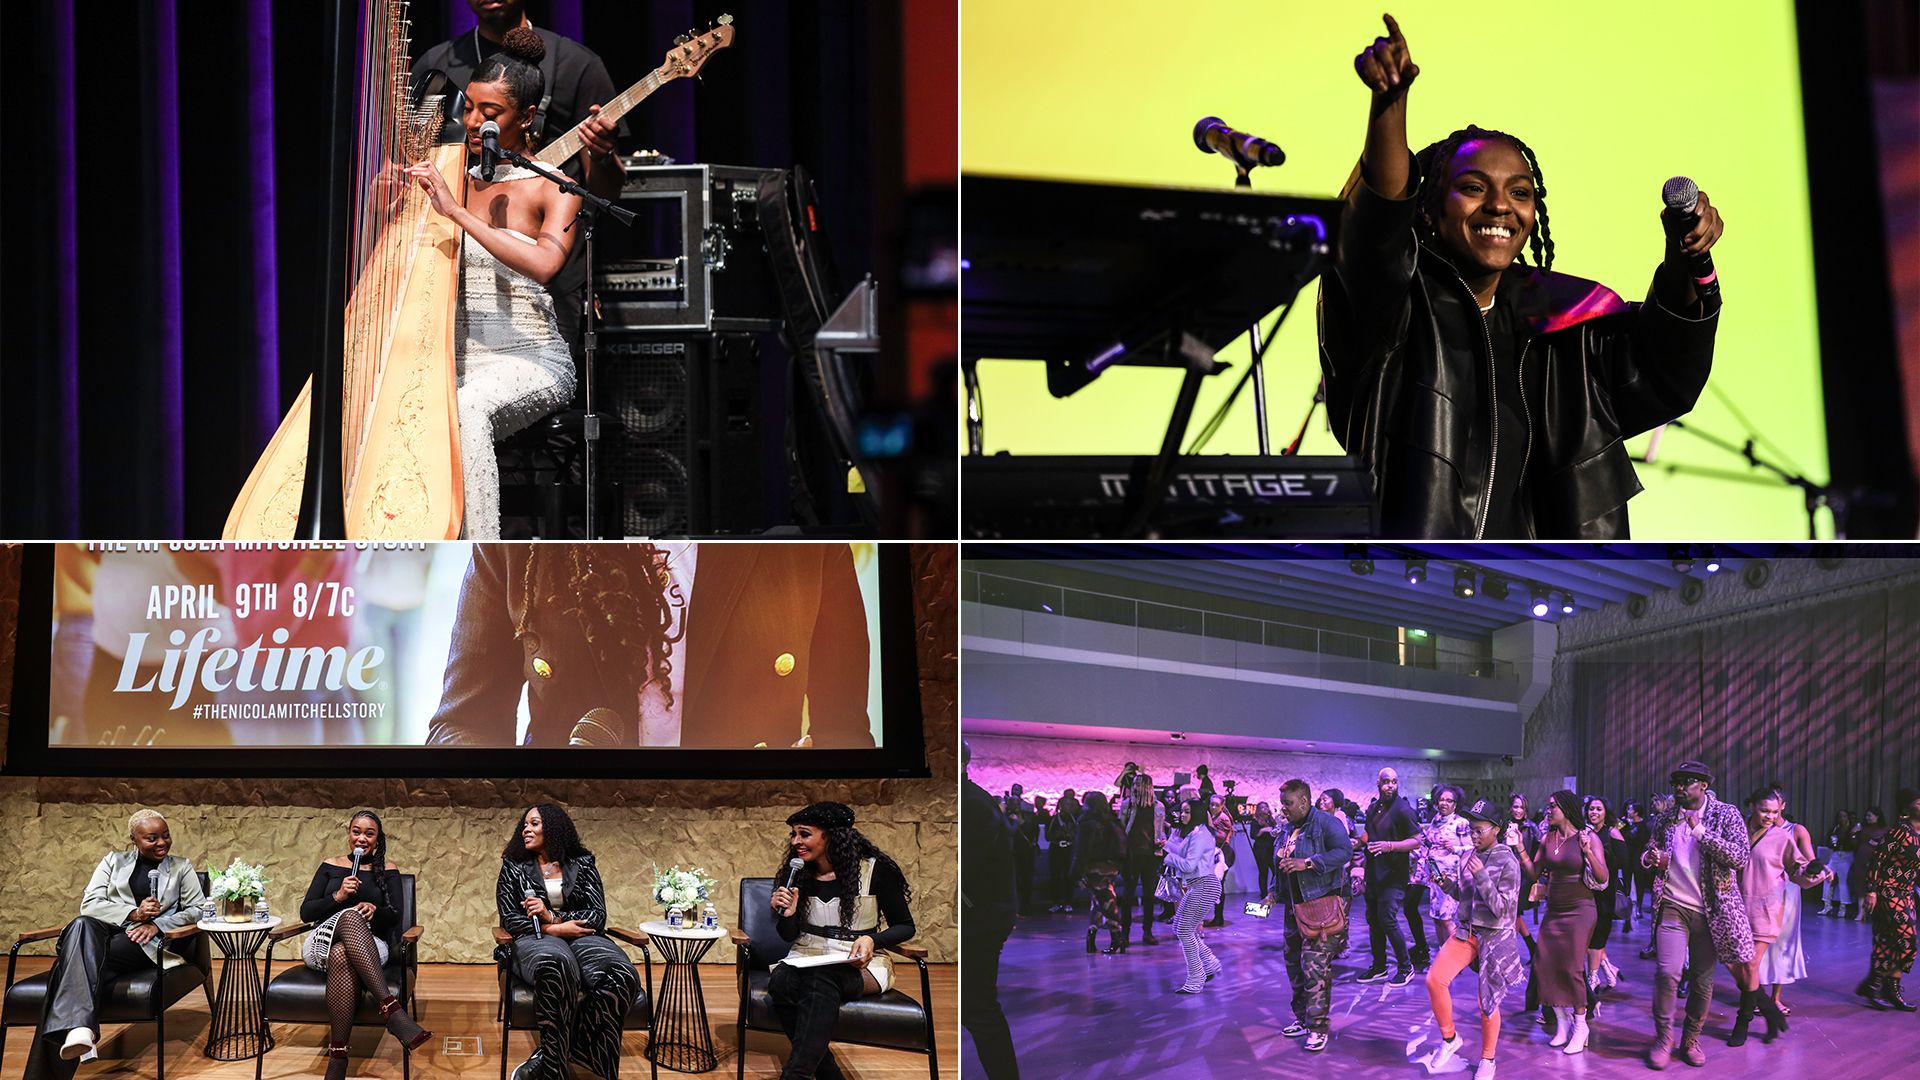 Four photos: The top left image shows a woman playing the harp. The top right image shows a woman holding a mic, smiling and pointing in the air. The bottom left photo shows four women sitting in chairs holding microphones. The bottom right photo shows a group of people dancing.